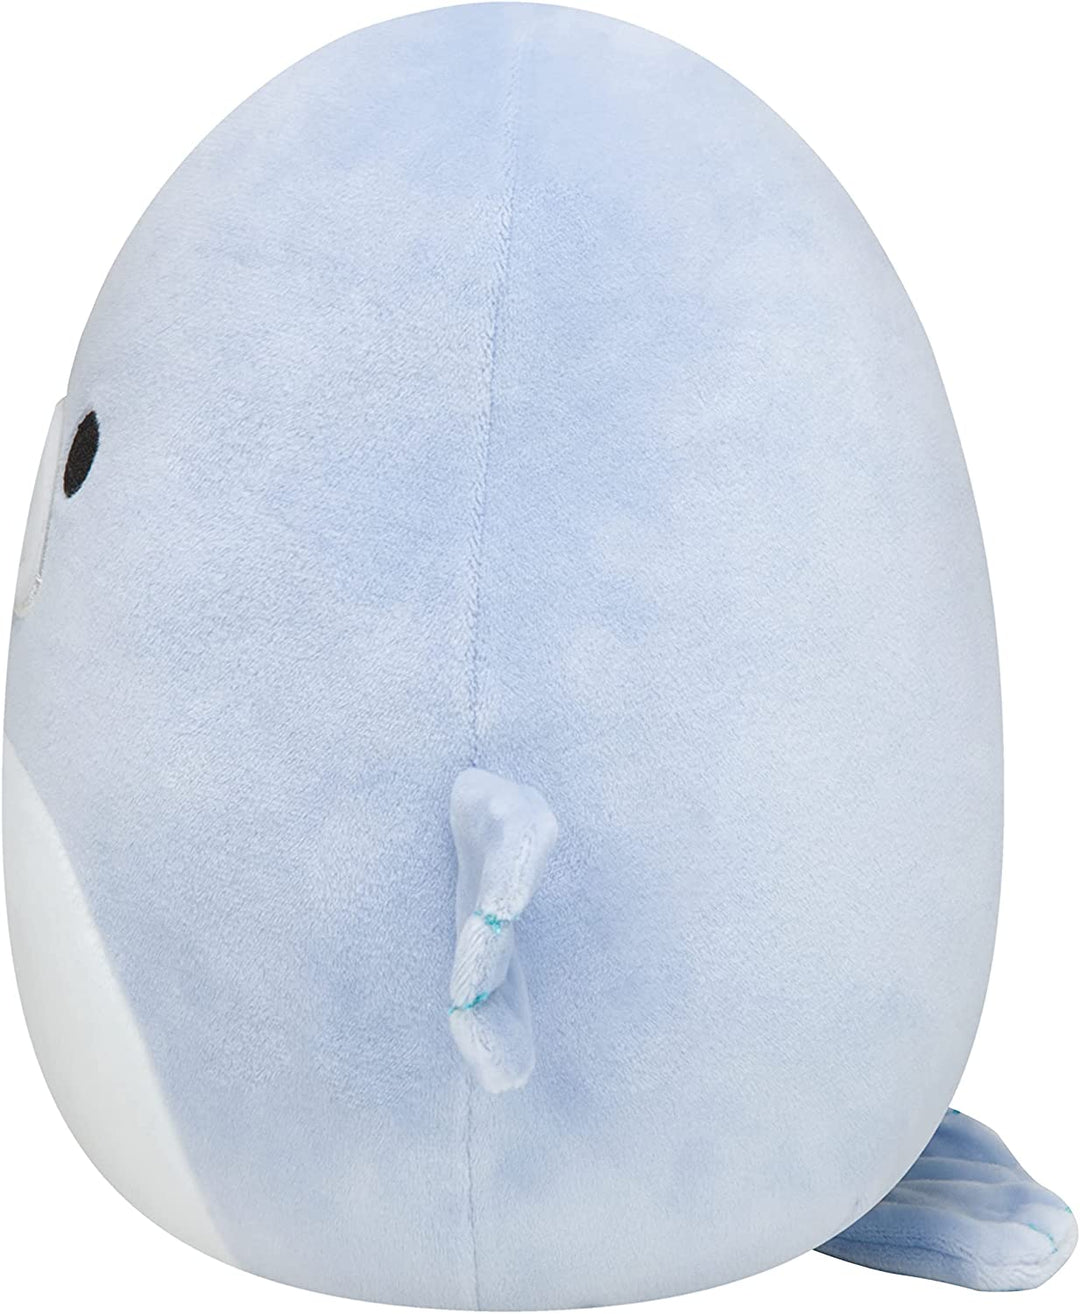 Squishmallows 12" Soft Toy Maeve the Blue Seal